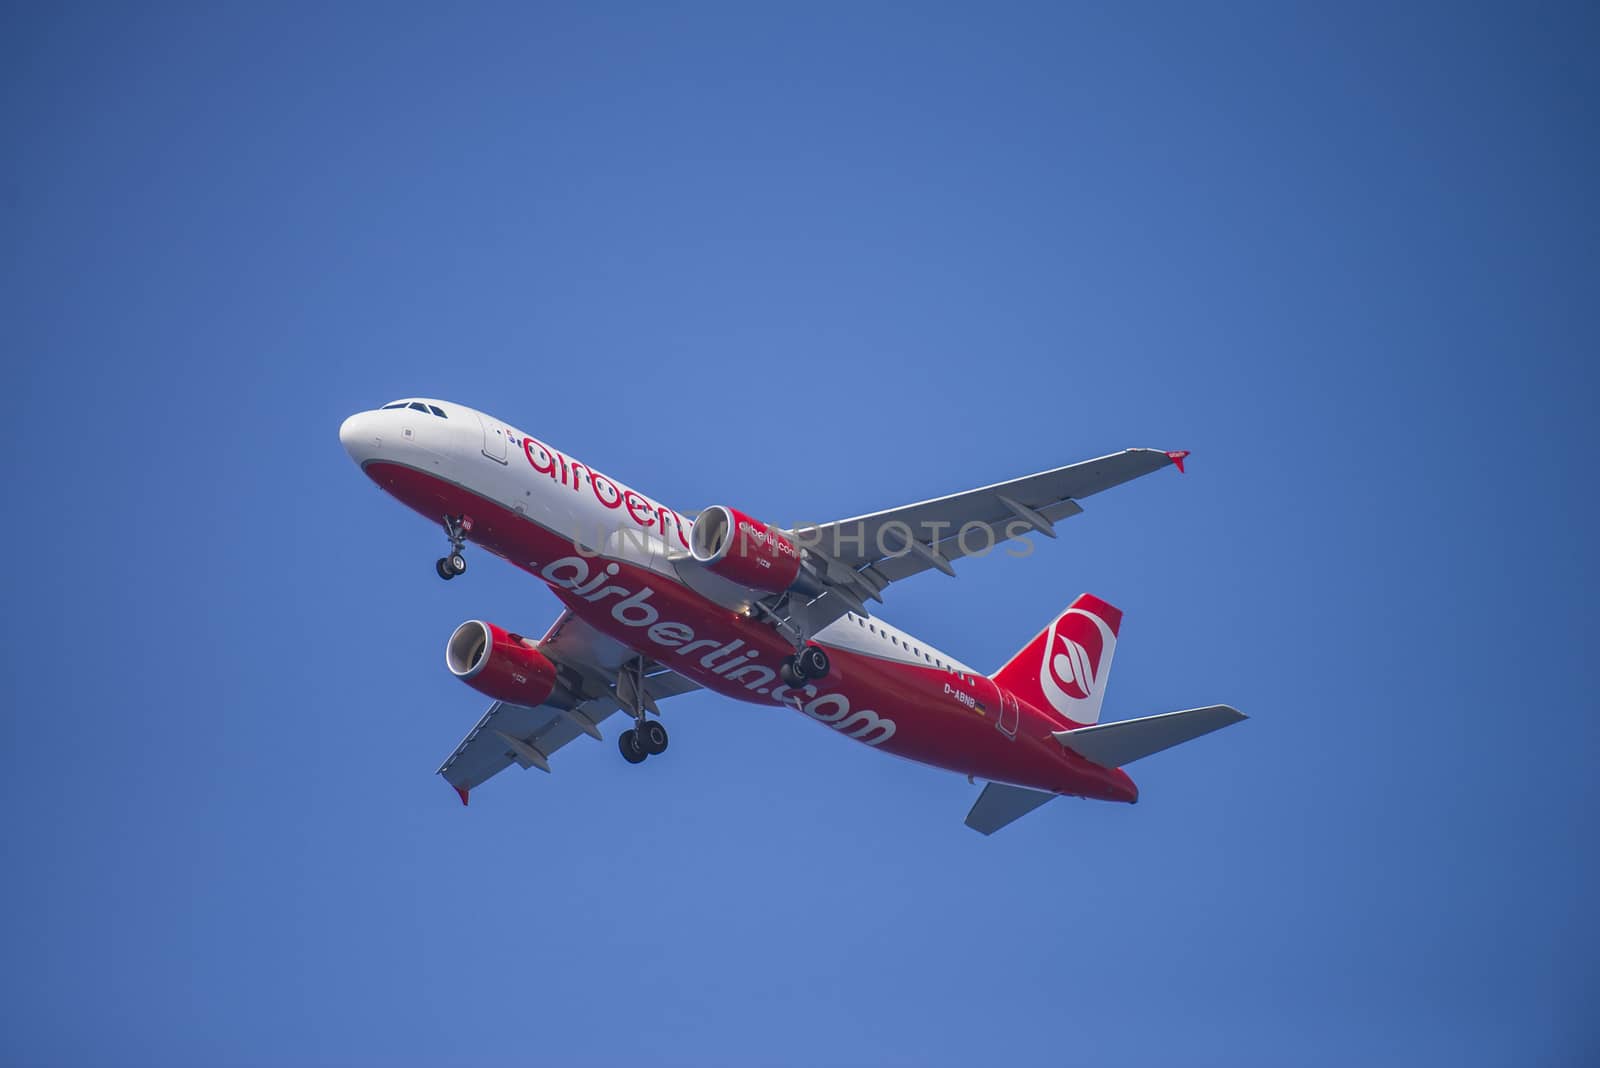 Air-Berlin, Germany, Airbus a320-214. The pictures of the planes are shot very close an airport just before landing. September 2013.